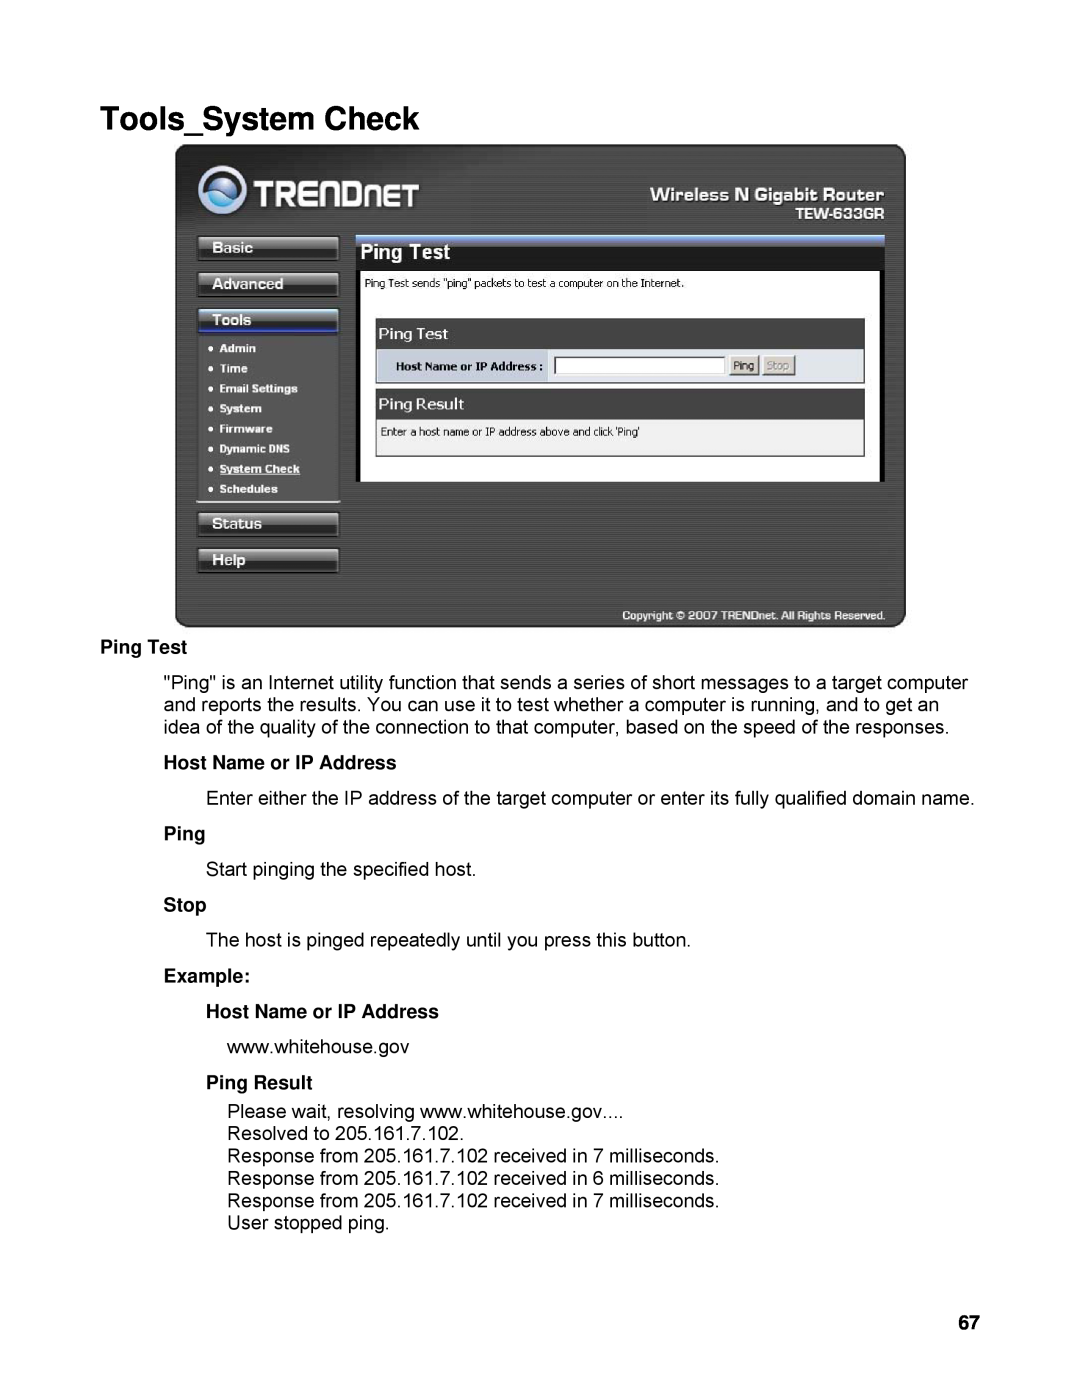 TRENDnet TEW-633GR manual ToolsSystem Check, Ping Test, Stop, Example Host Name or IP Address, Ping Result 